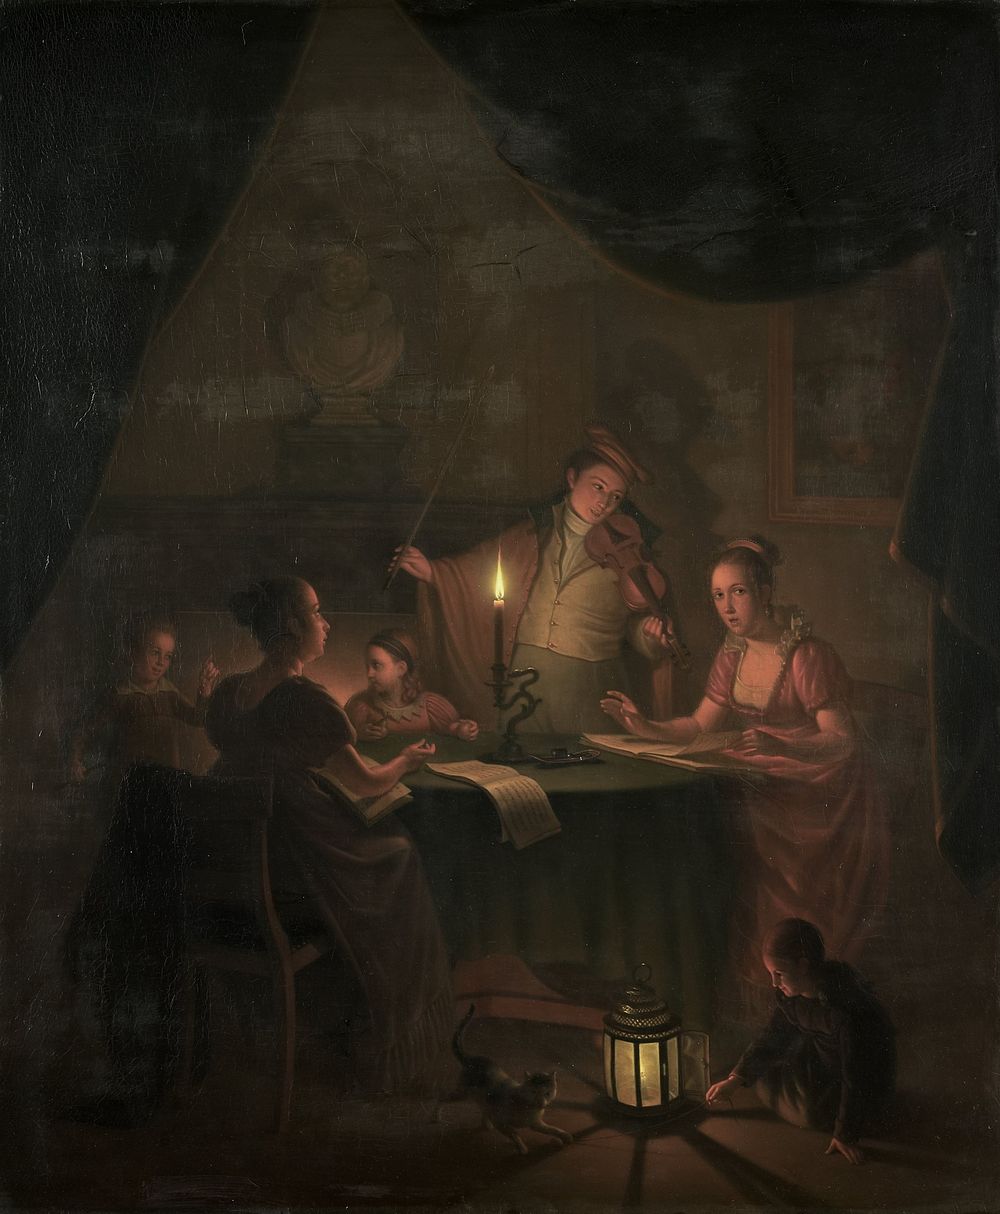 A Musical Party by Candlelight (1786 - 1820) by Michiel Versteegh